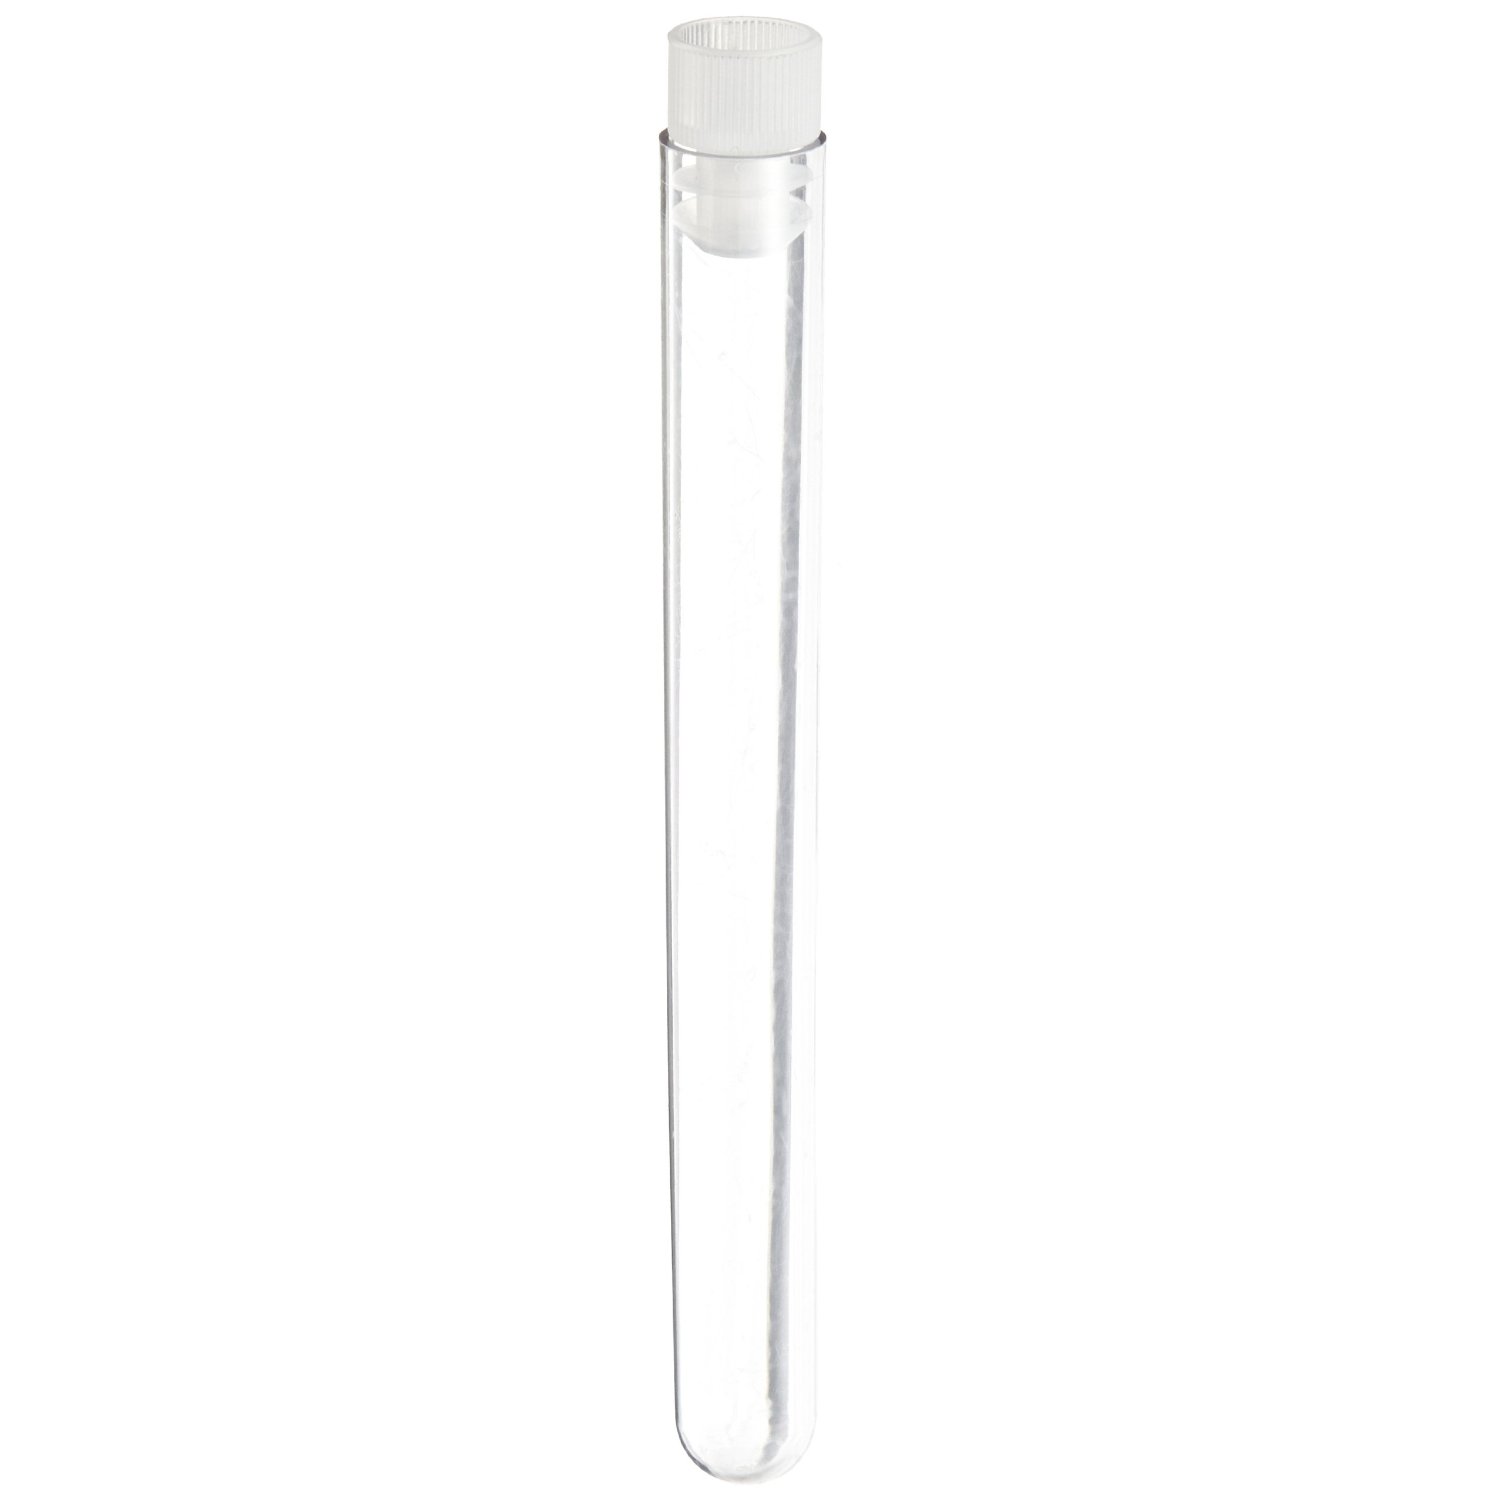 These test tubes are perfect for a mad science party.